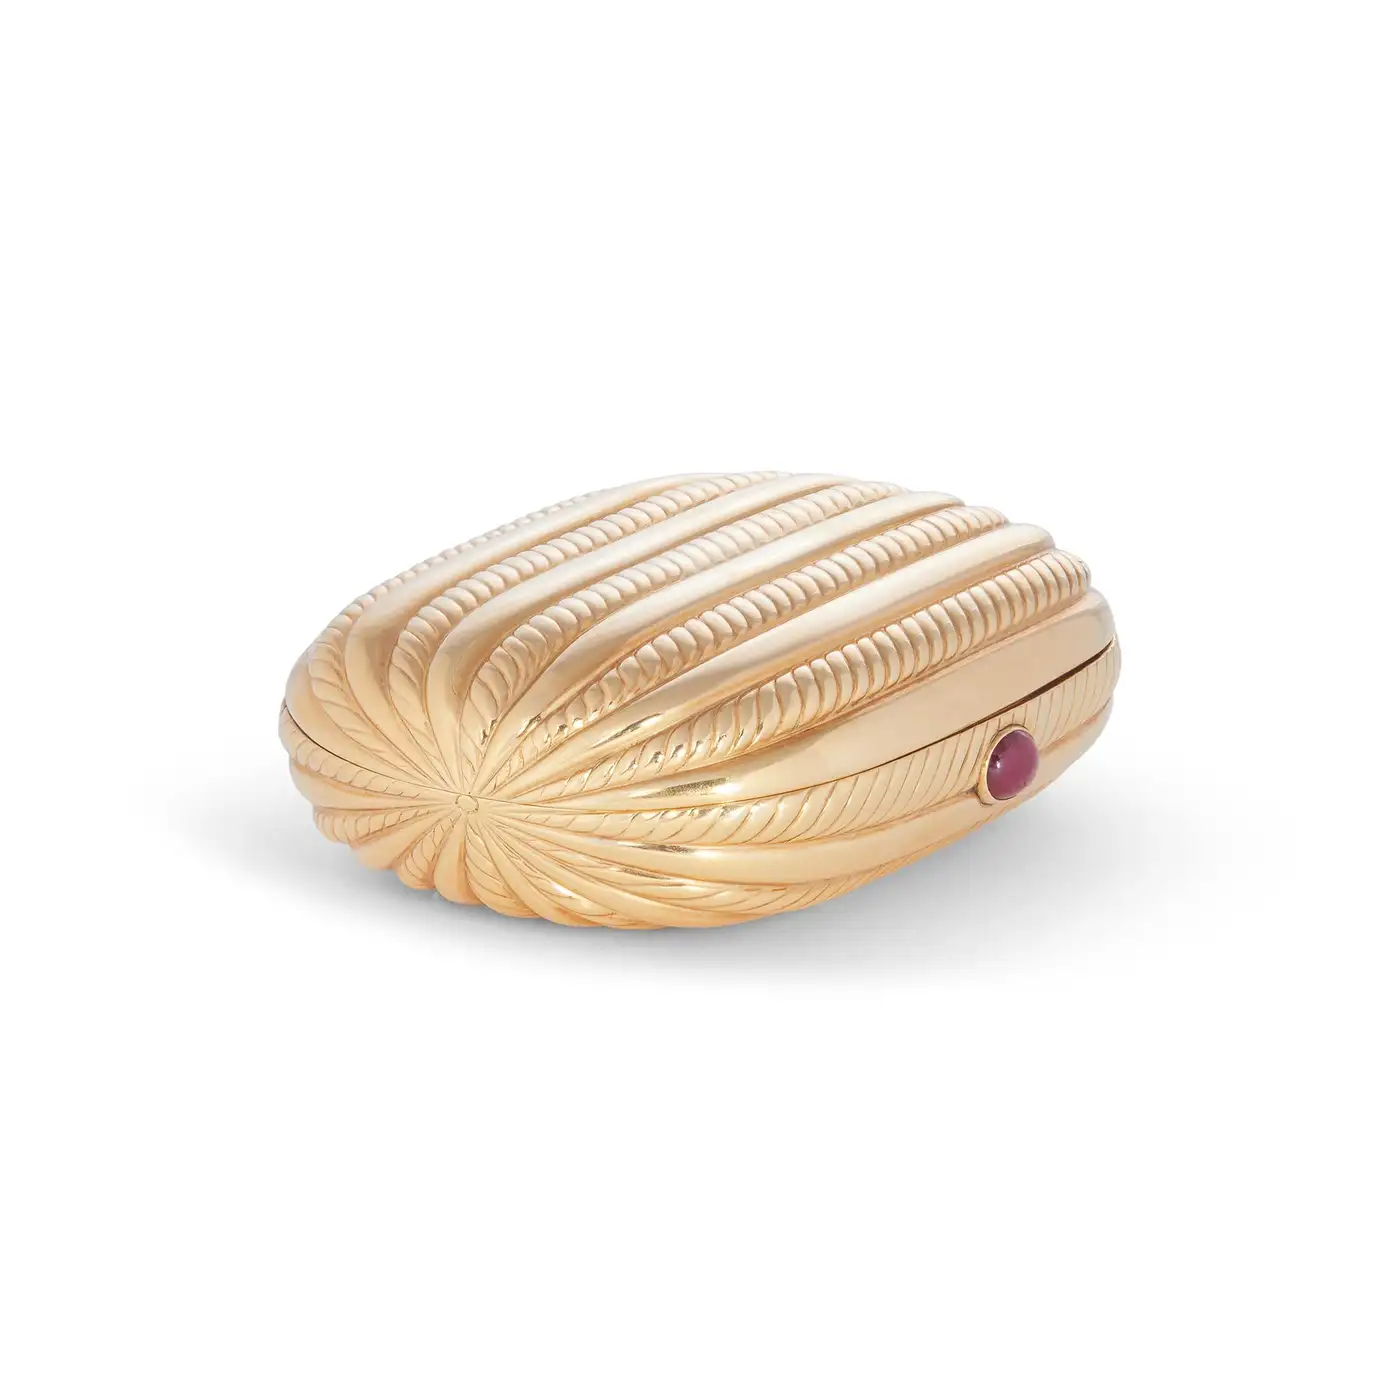 Bvlgari-Gold-and-Ruby-Compact-Case-Circa-1960s-4.webp